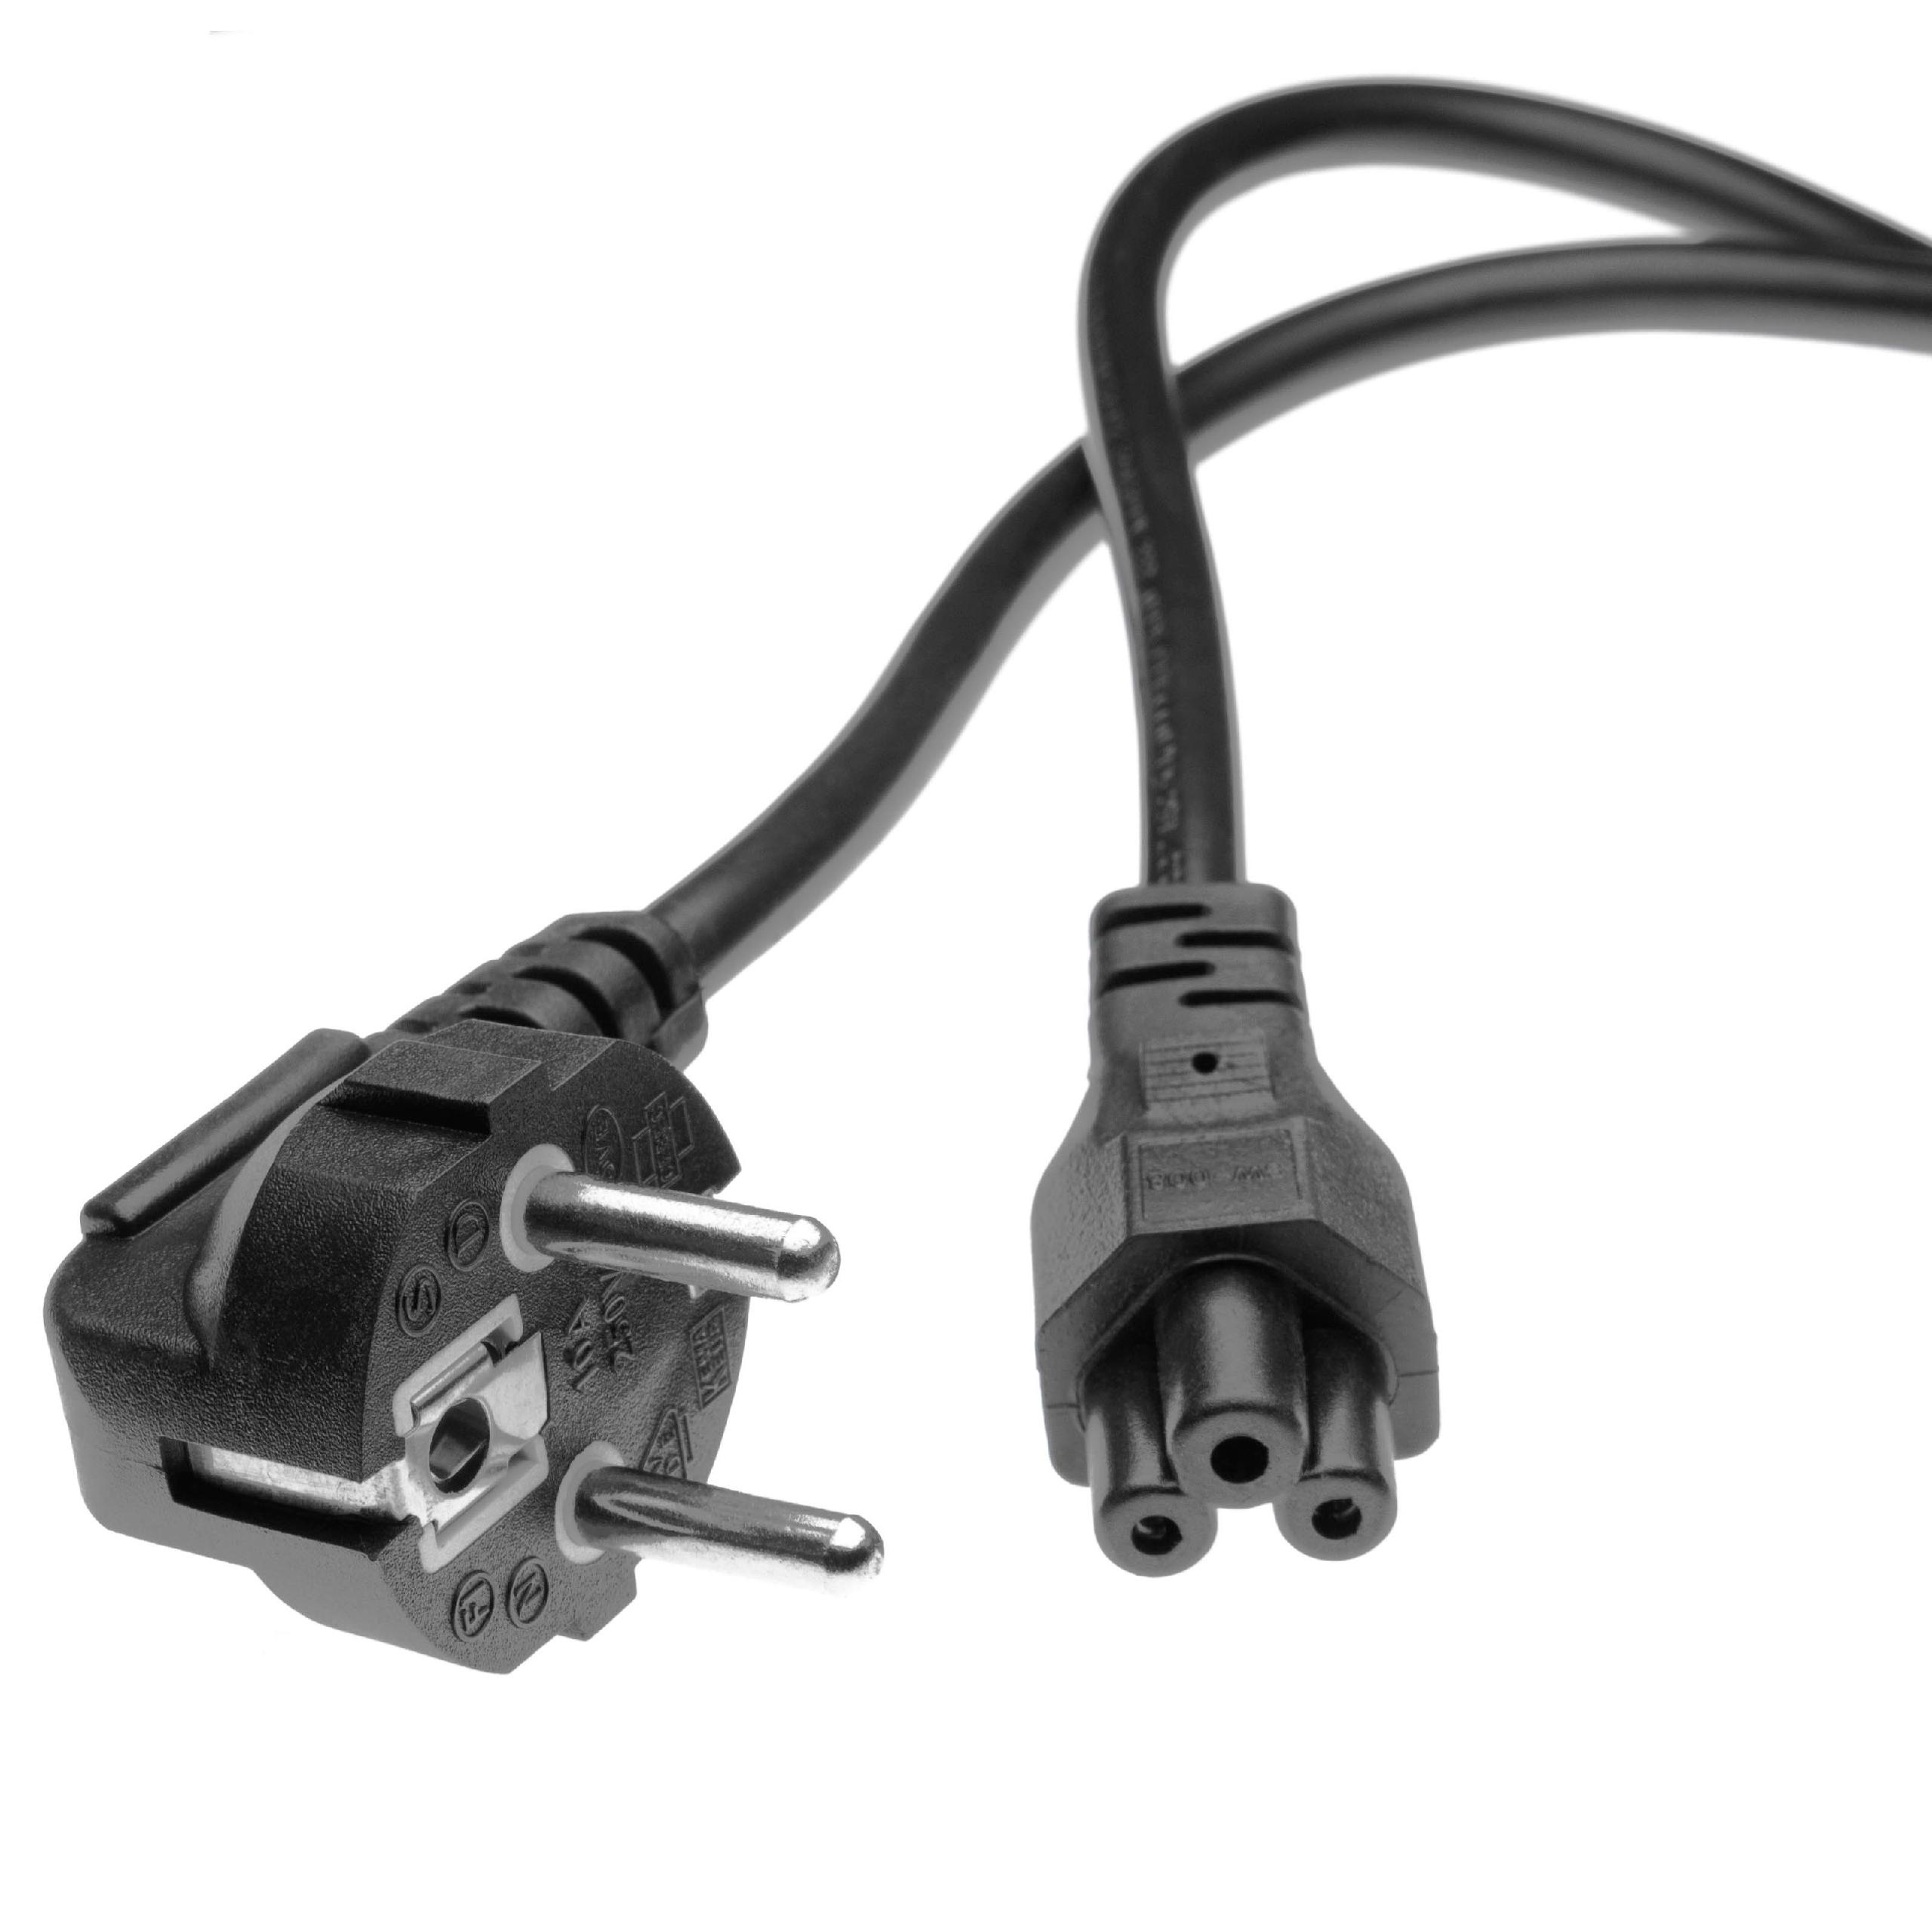 C5 Power Cable Euro Plug suitable for Robot Vacuum Cleaner - 1.2 m